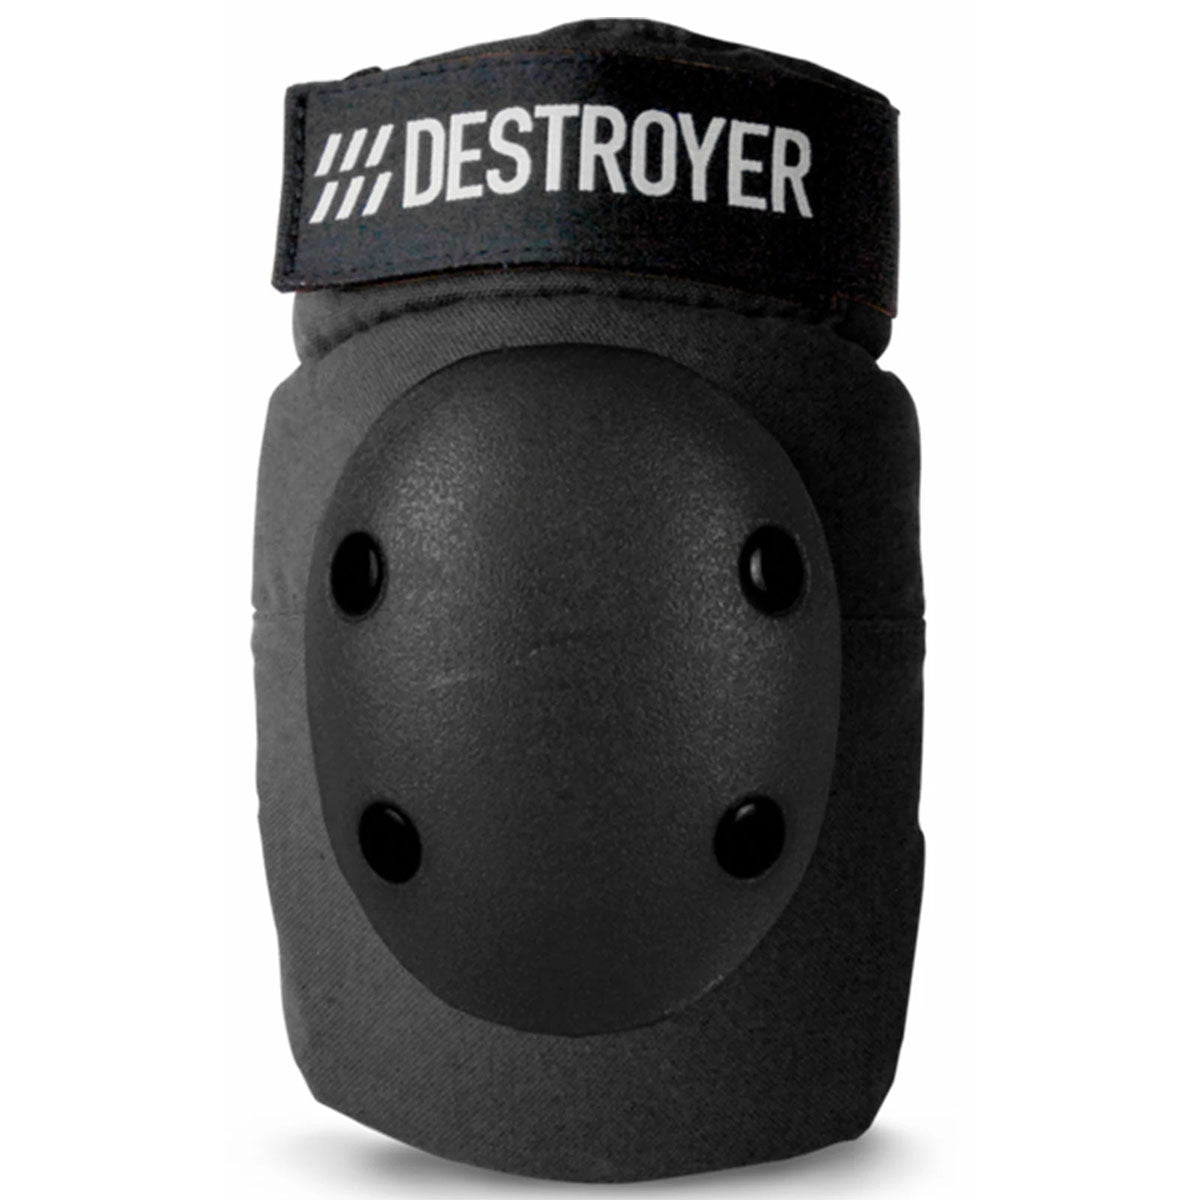 Destroyer The Elbow Pads - Black image 1